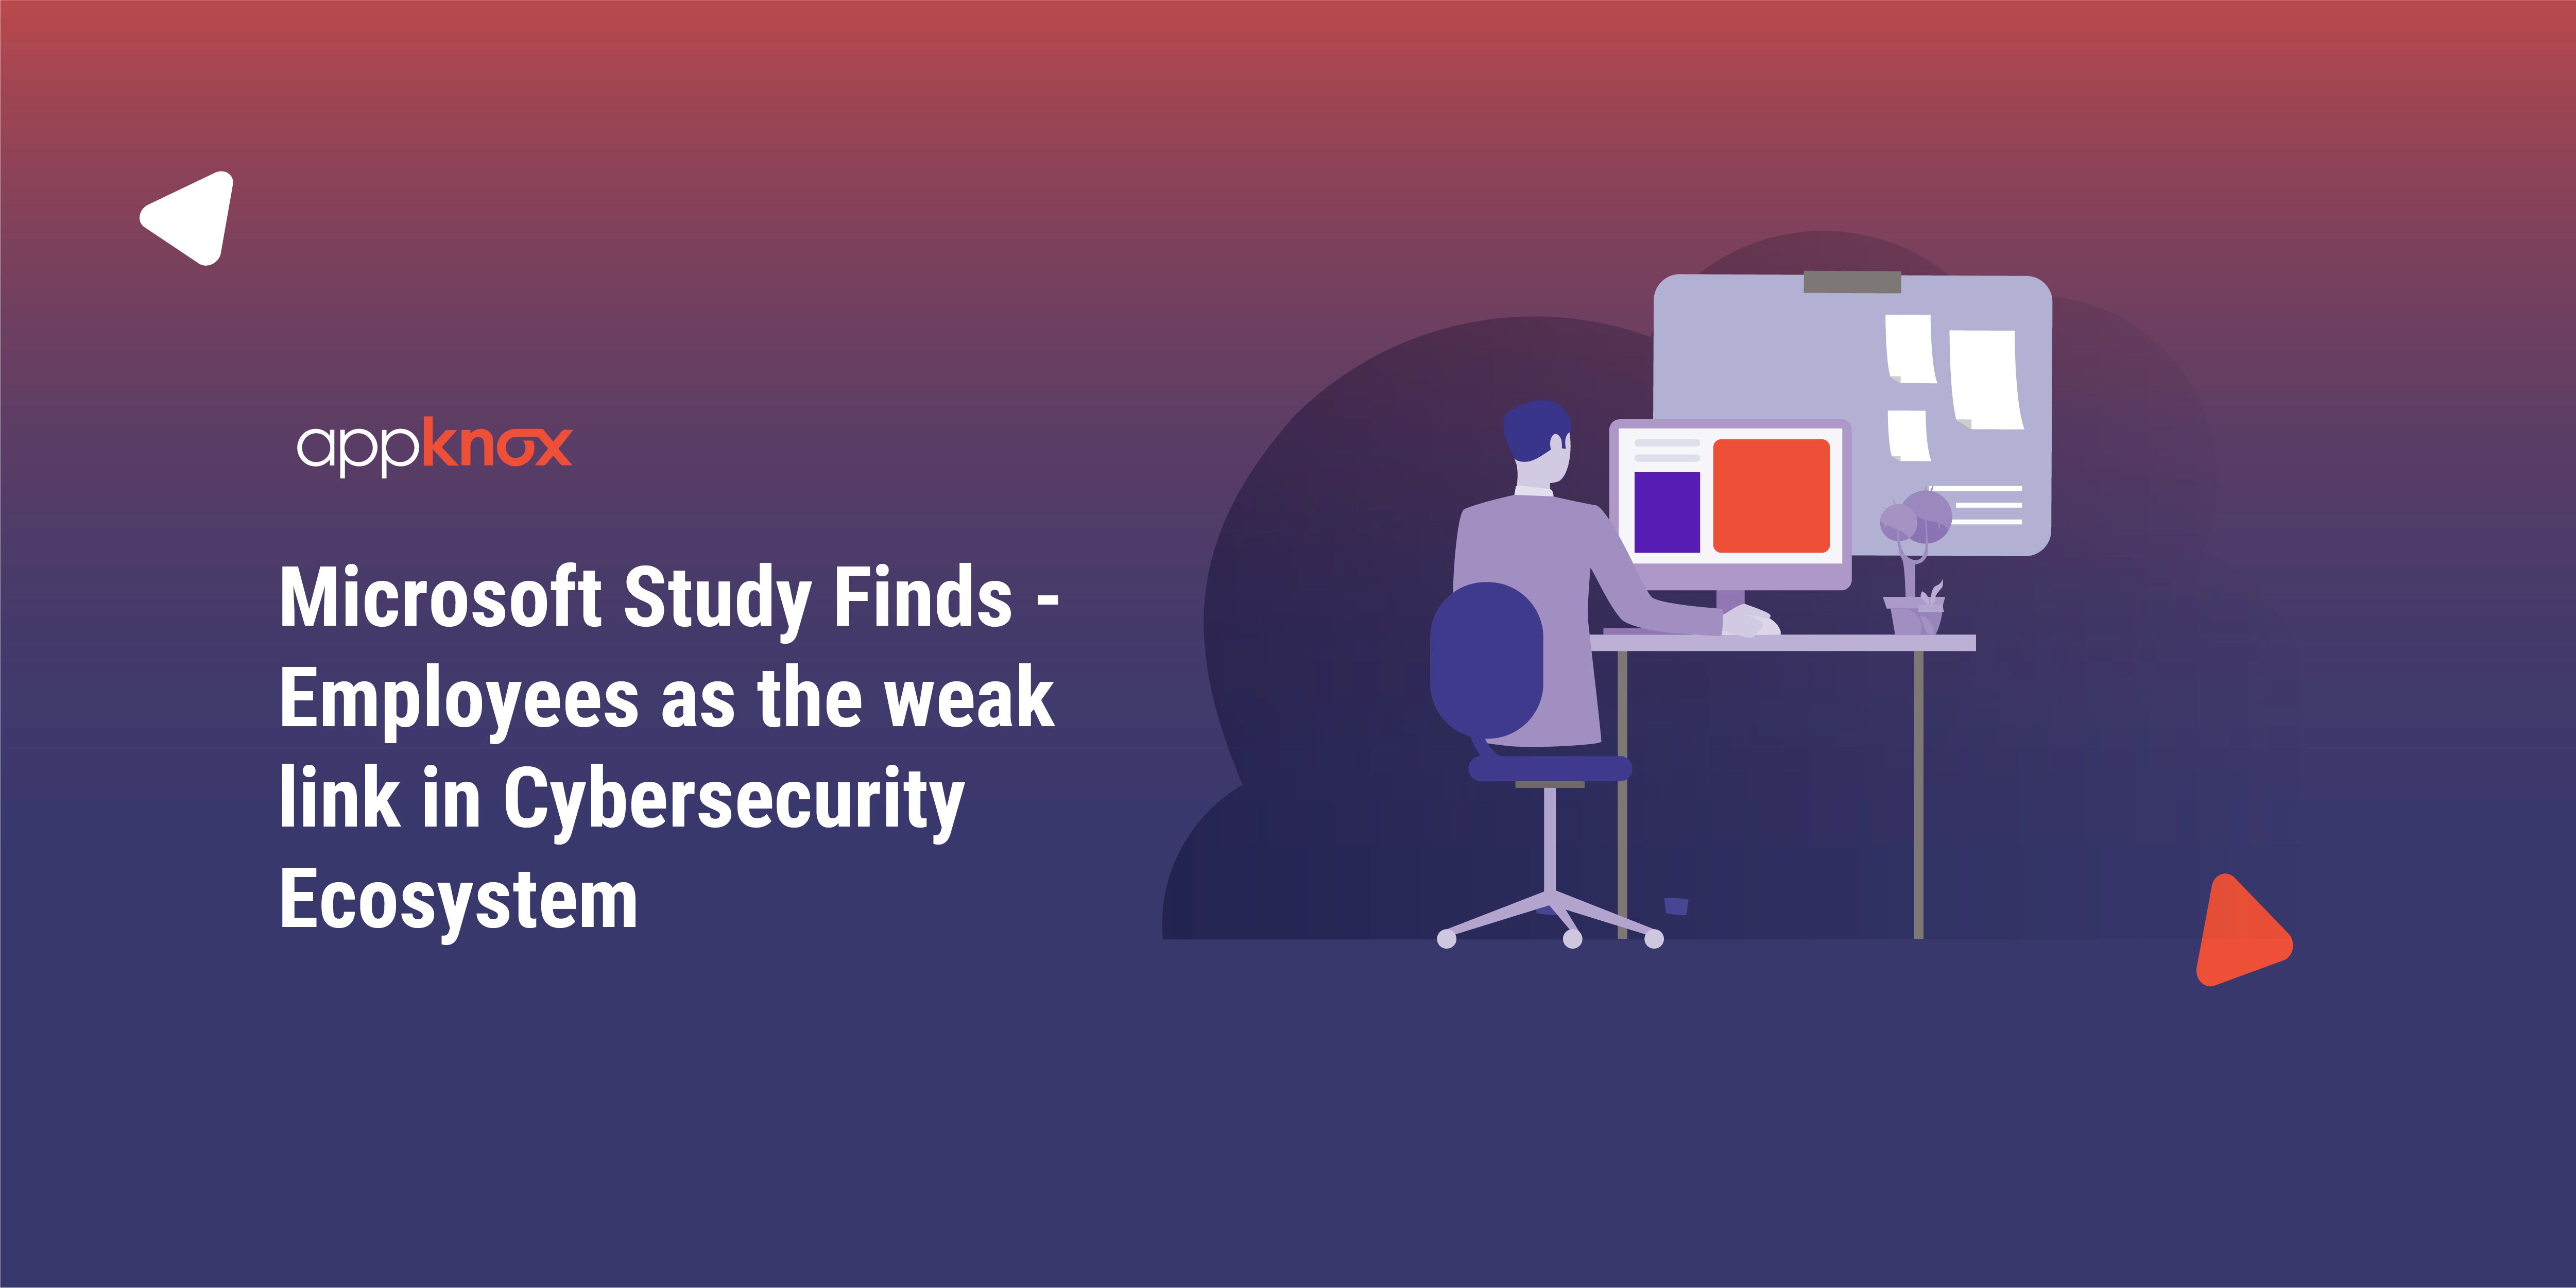 Microsoft Study Finds - Employees as the weak link in Cybersecurity Ecosystem